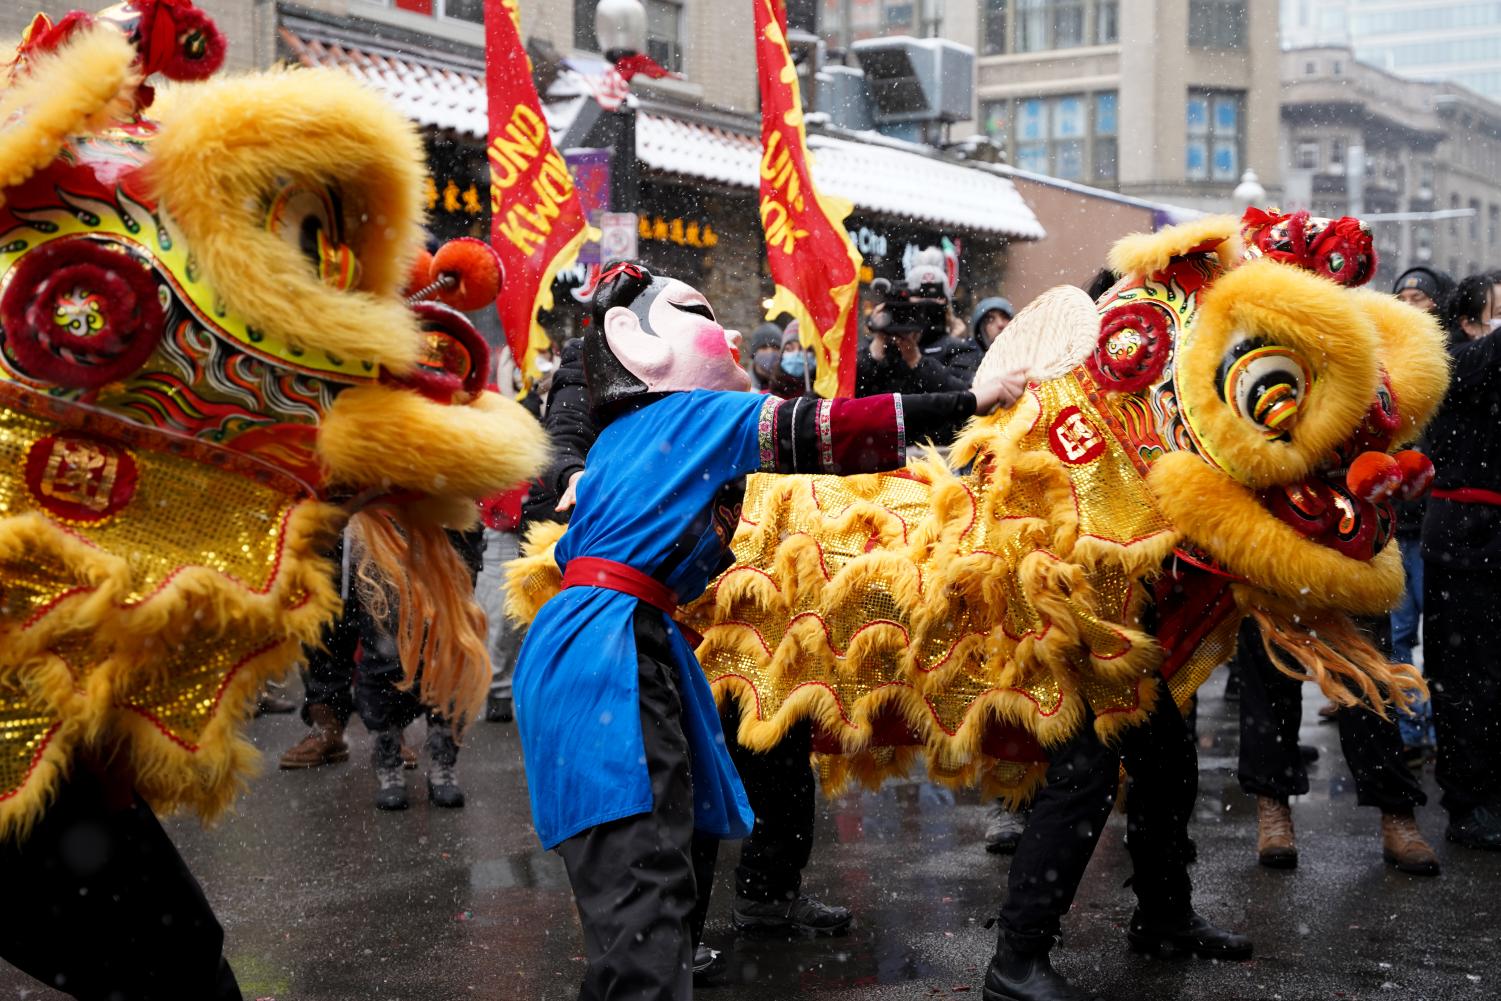 Lunar New Year celebrations return to Boston’s Chinatown The Scope